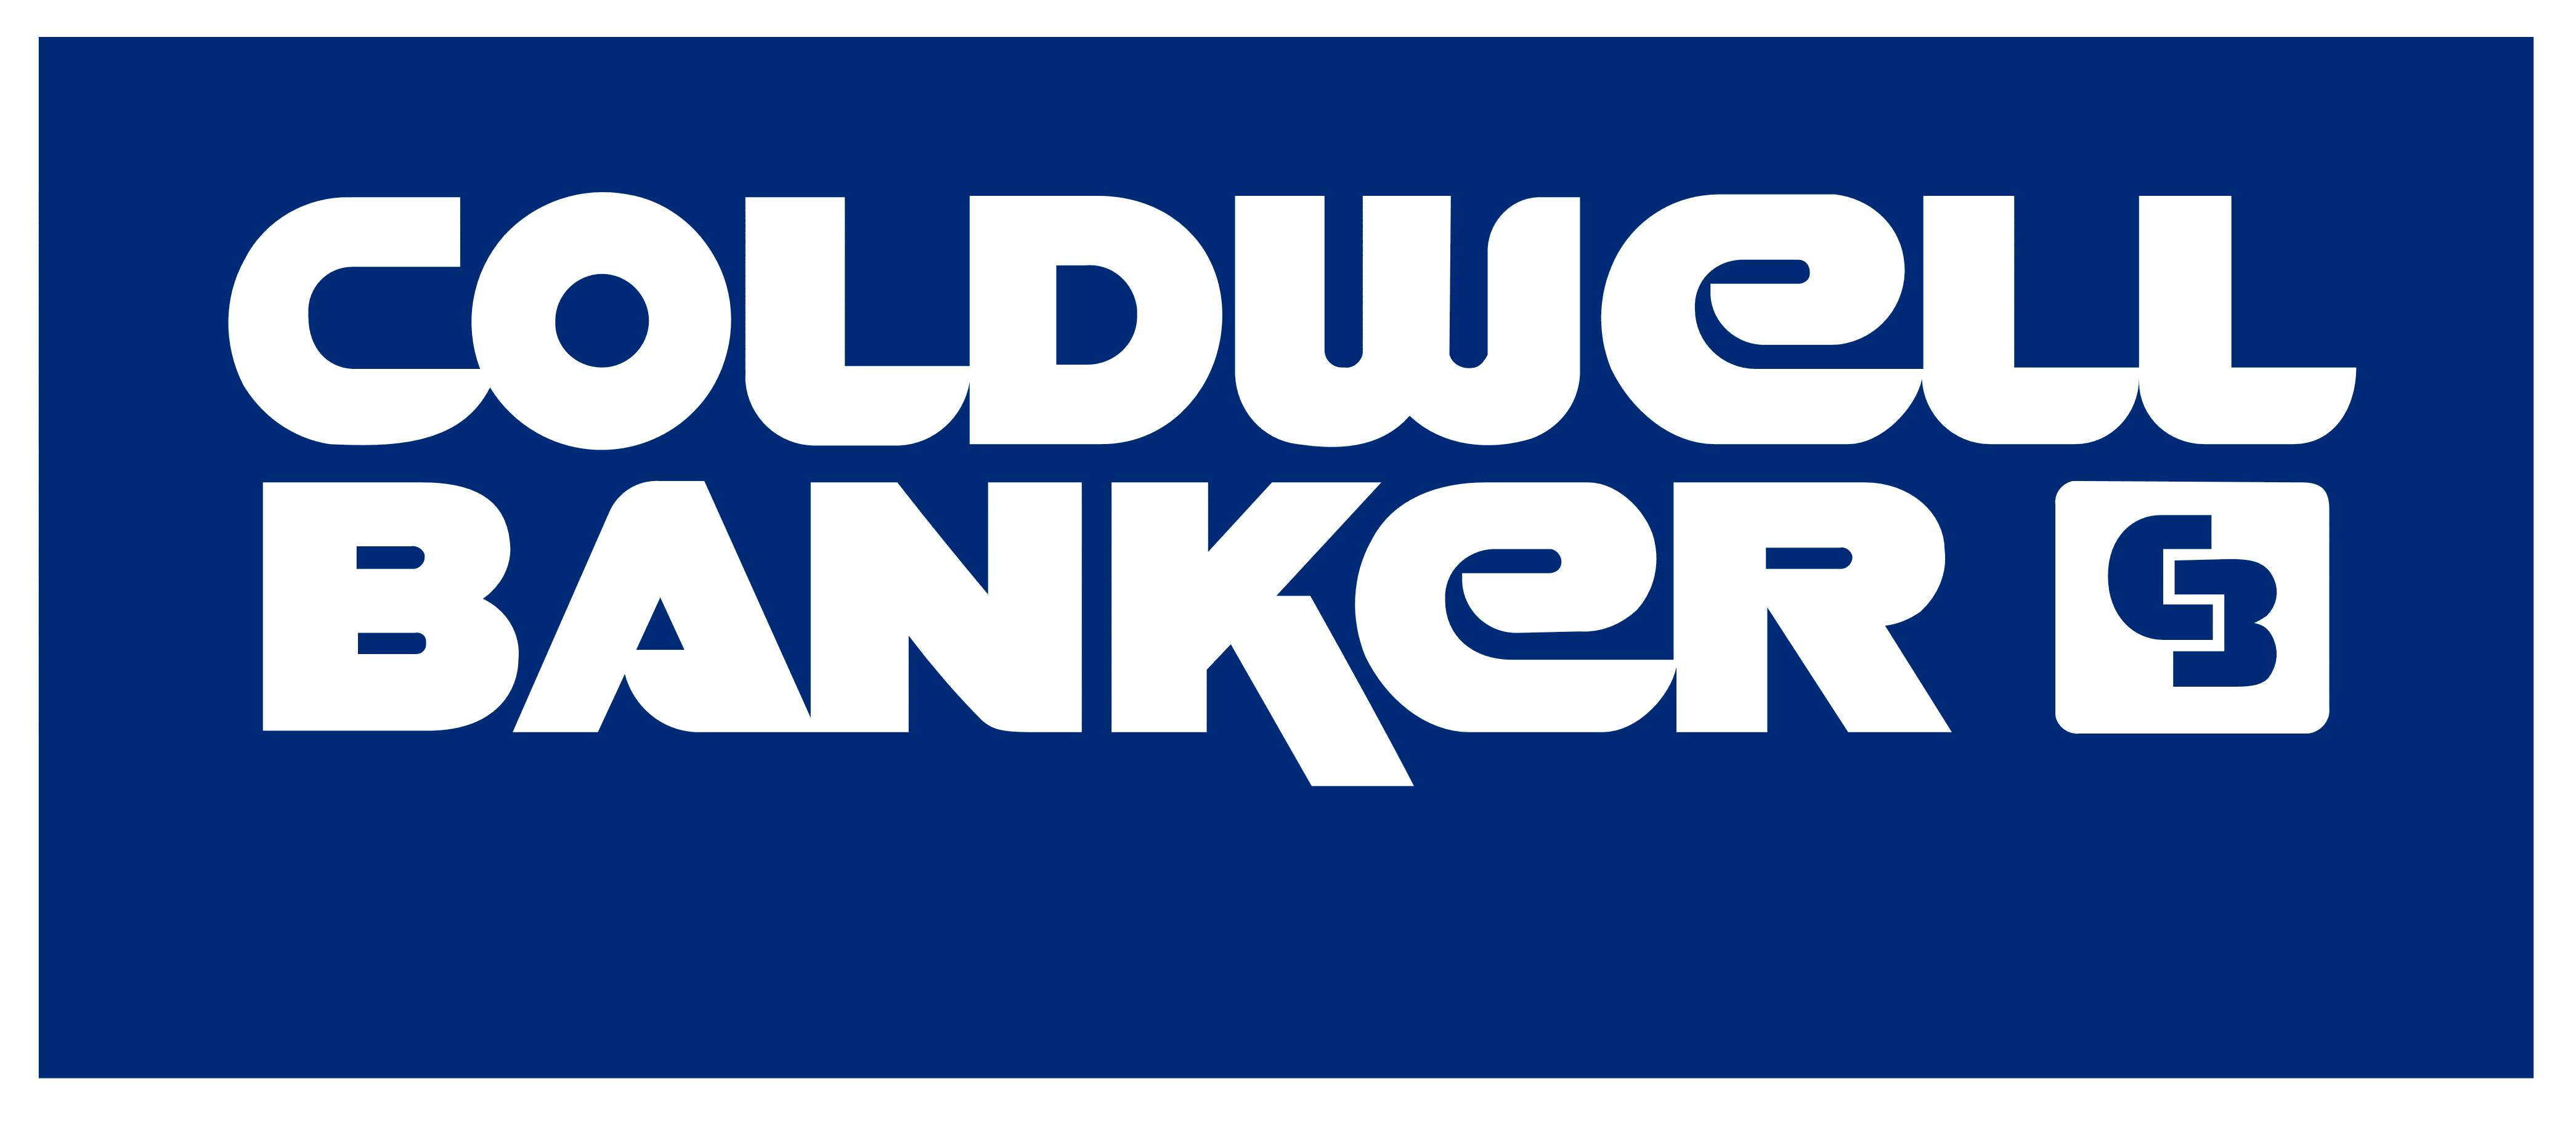 Coldwell Banker Logo - Coldwell Banker